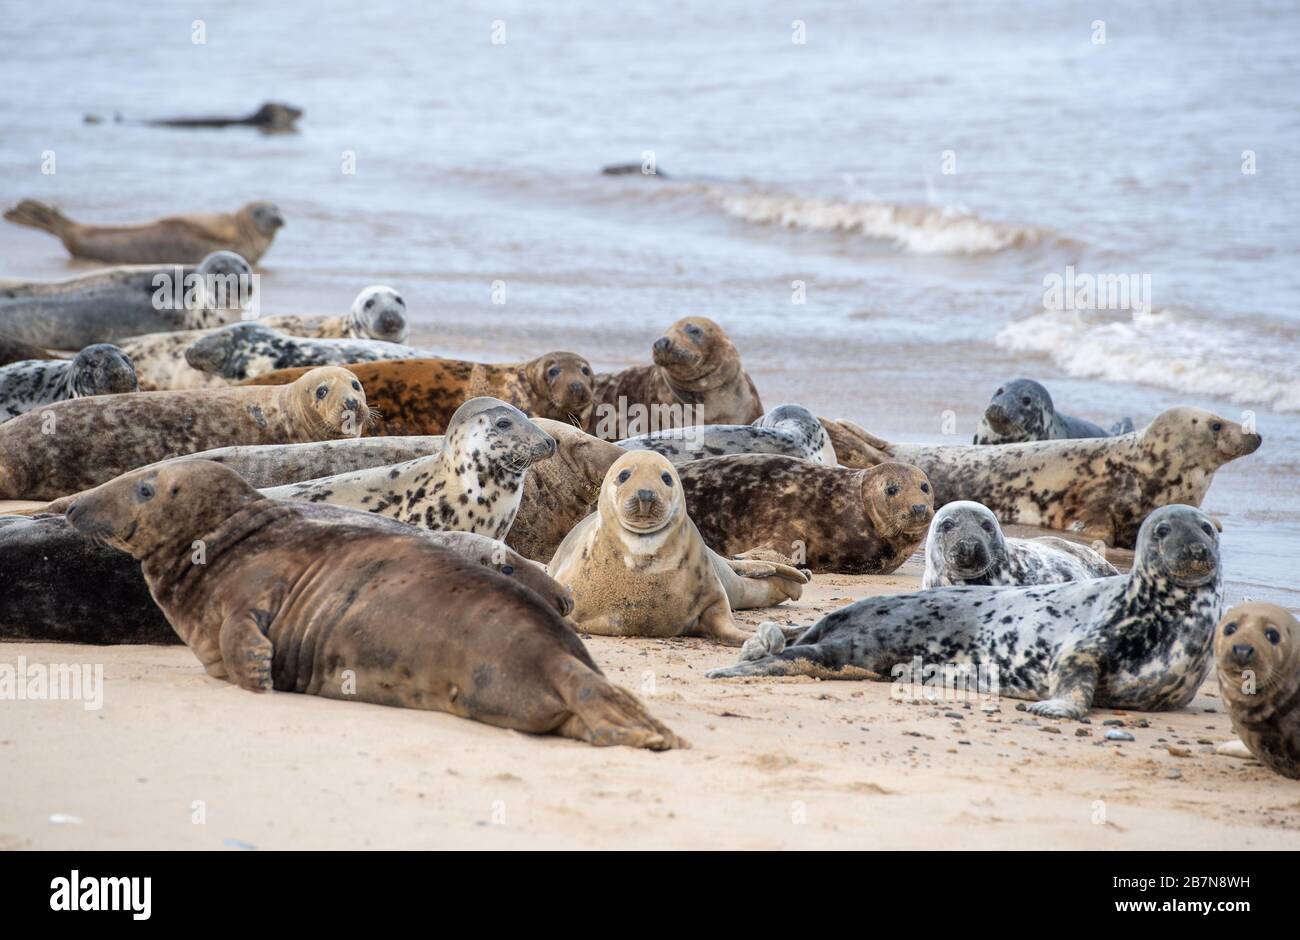 Some of the estimated 2,500 Atlantic grey seals on Horsey Beach in Norfiolk, where they gather every year to moult their worn out fur and grow new sleeker coats. Stock Photo